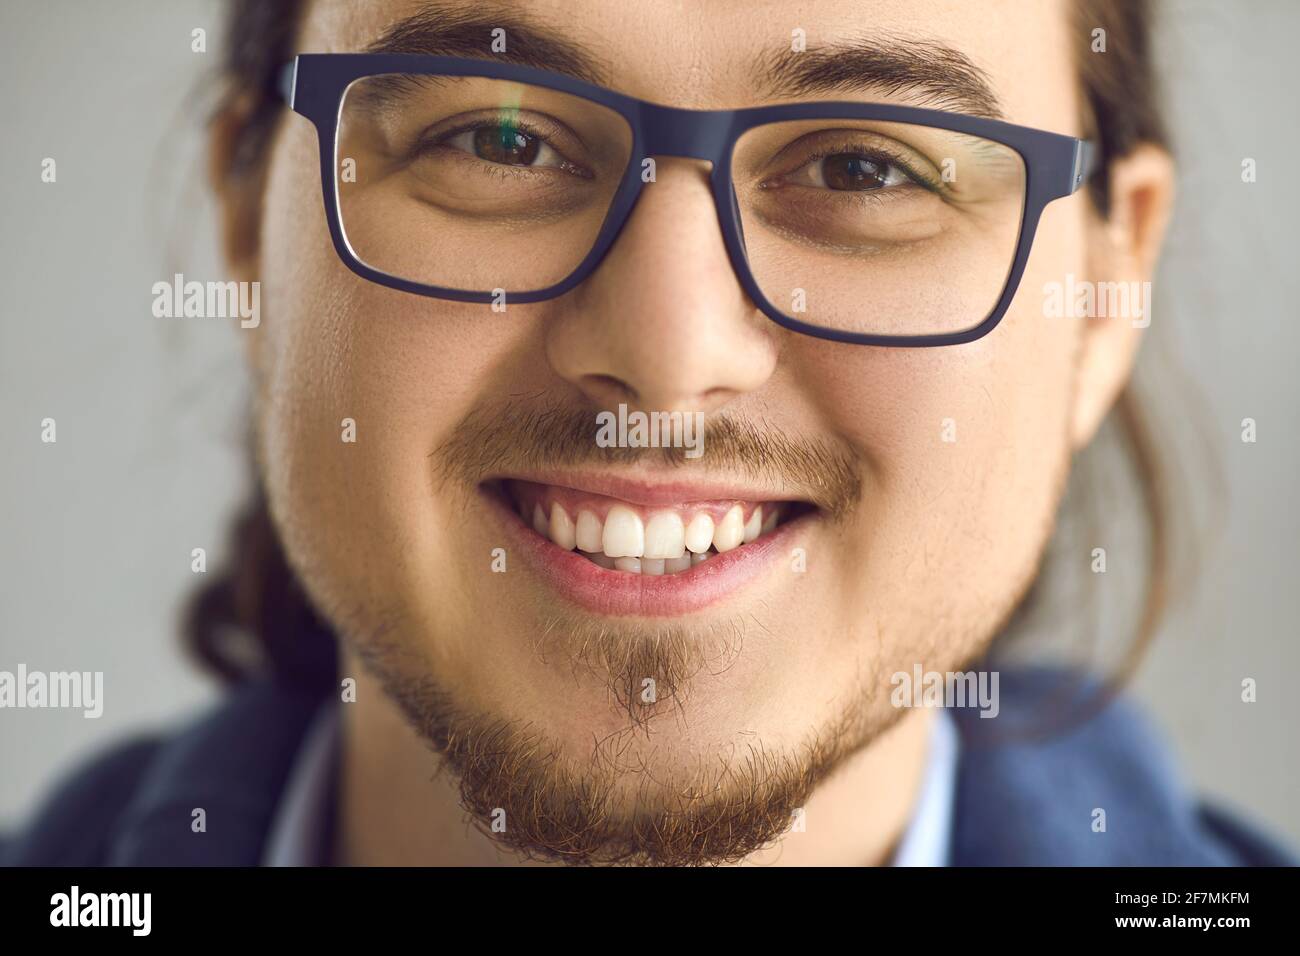 Smart asian man in eyeglasses with smiling expression face portrait close up Stock Photo